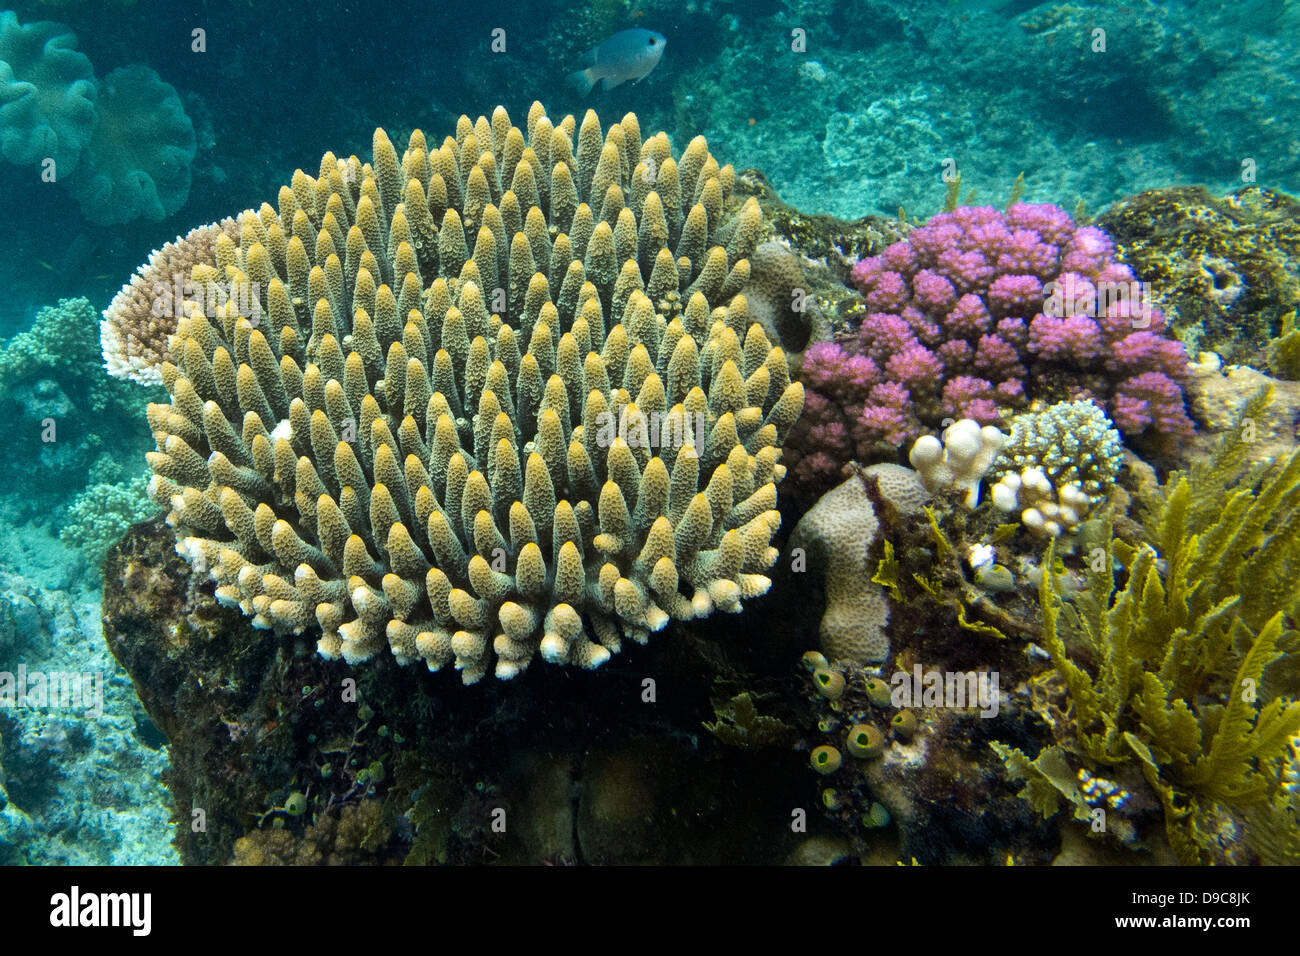 Coral formations, The Great Barrier Reef, Queensland, Australia Stock Photo